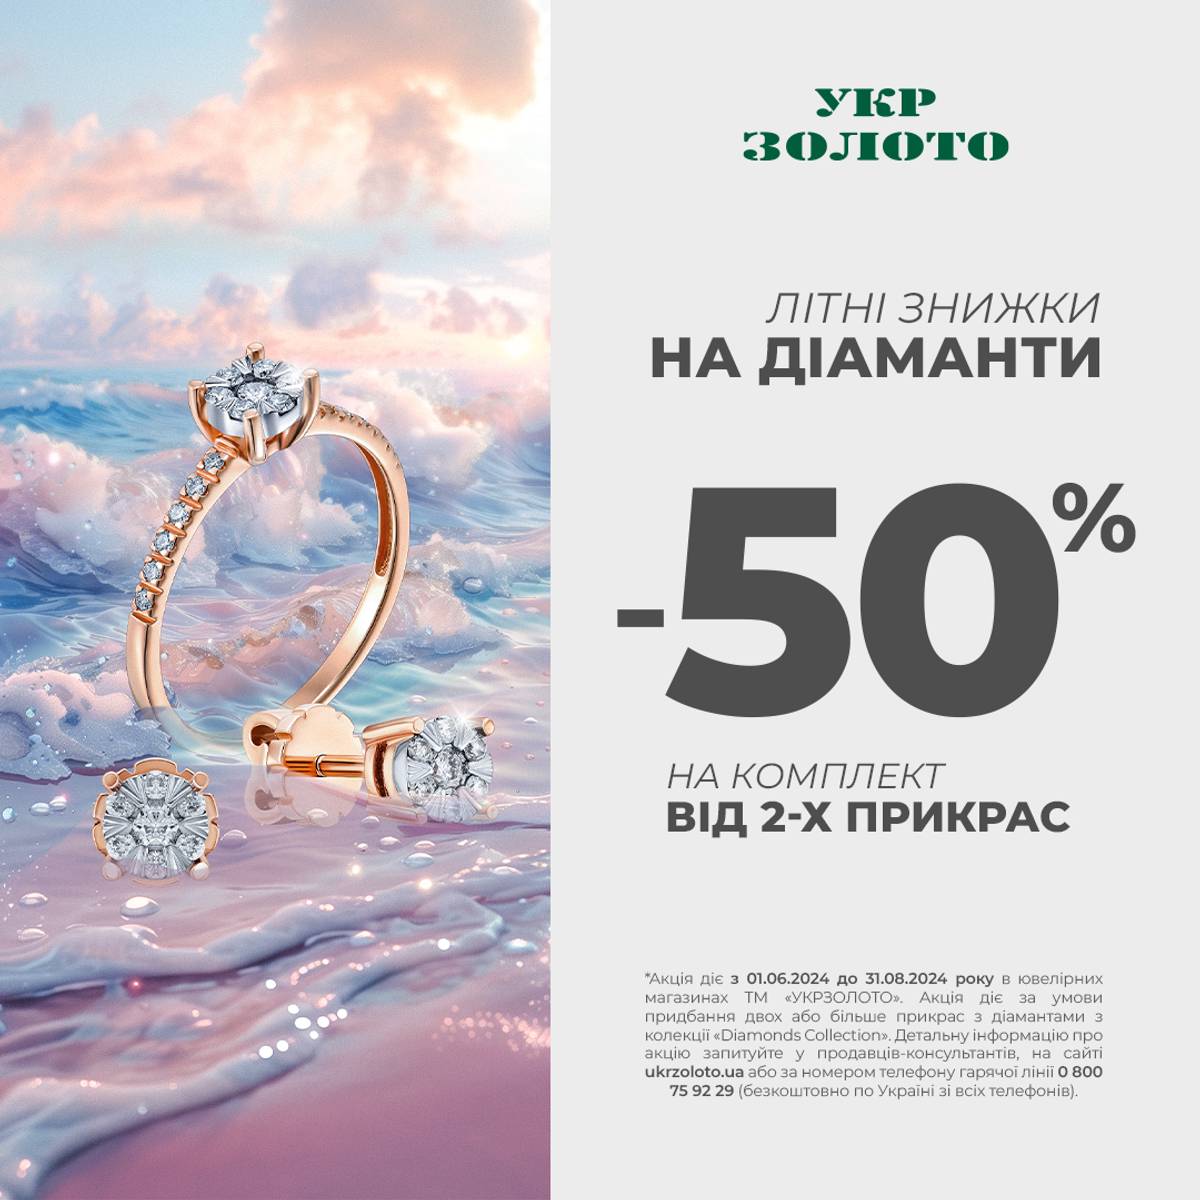 Brilliant offer from "Ukrzoloto"!